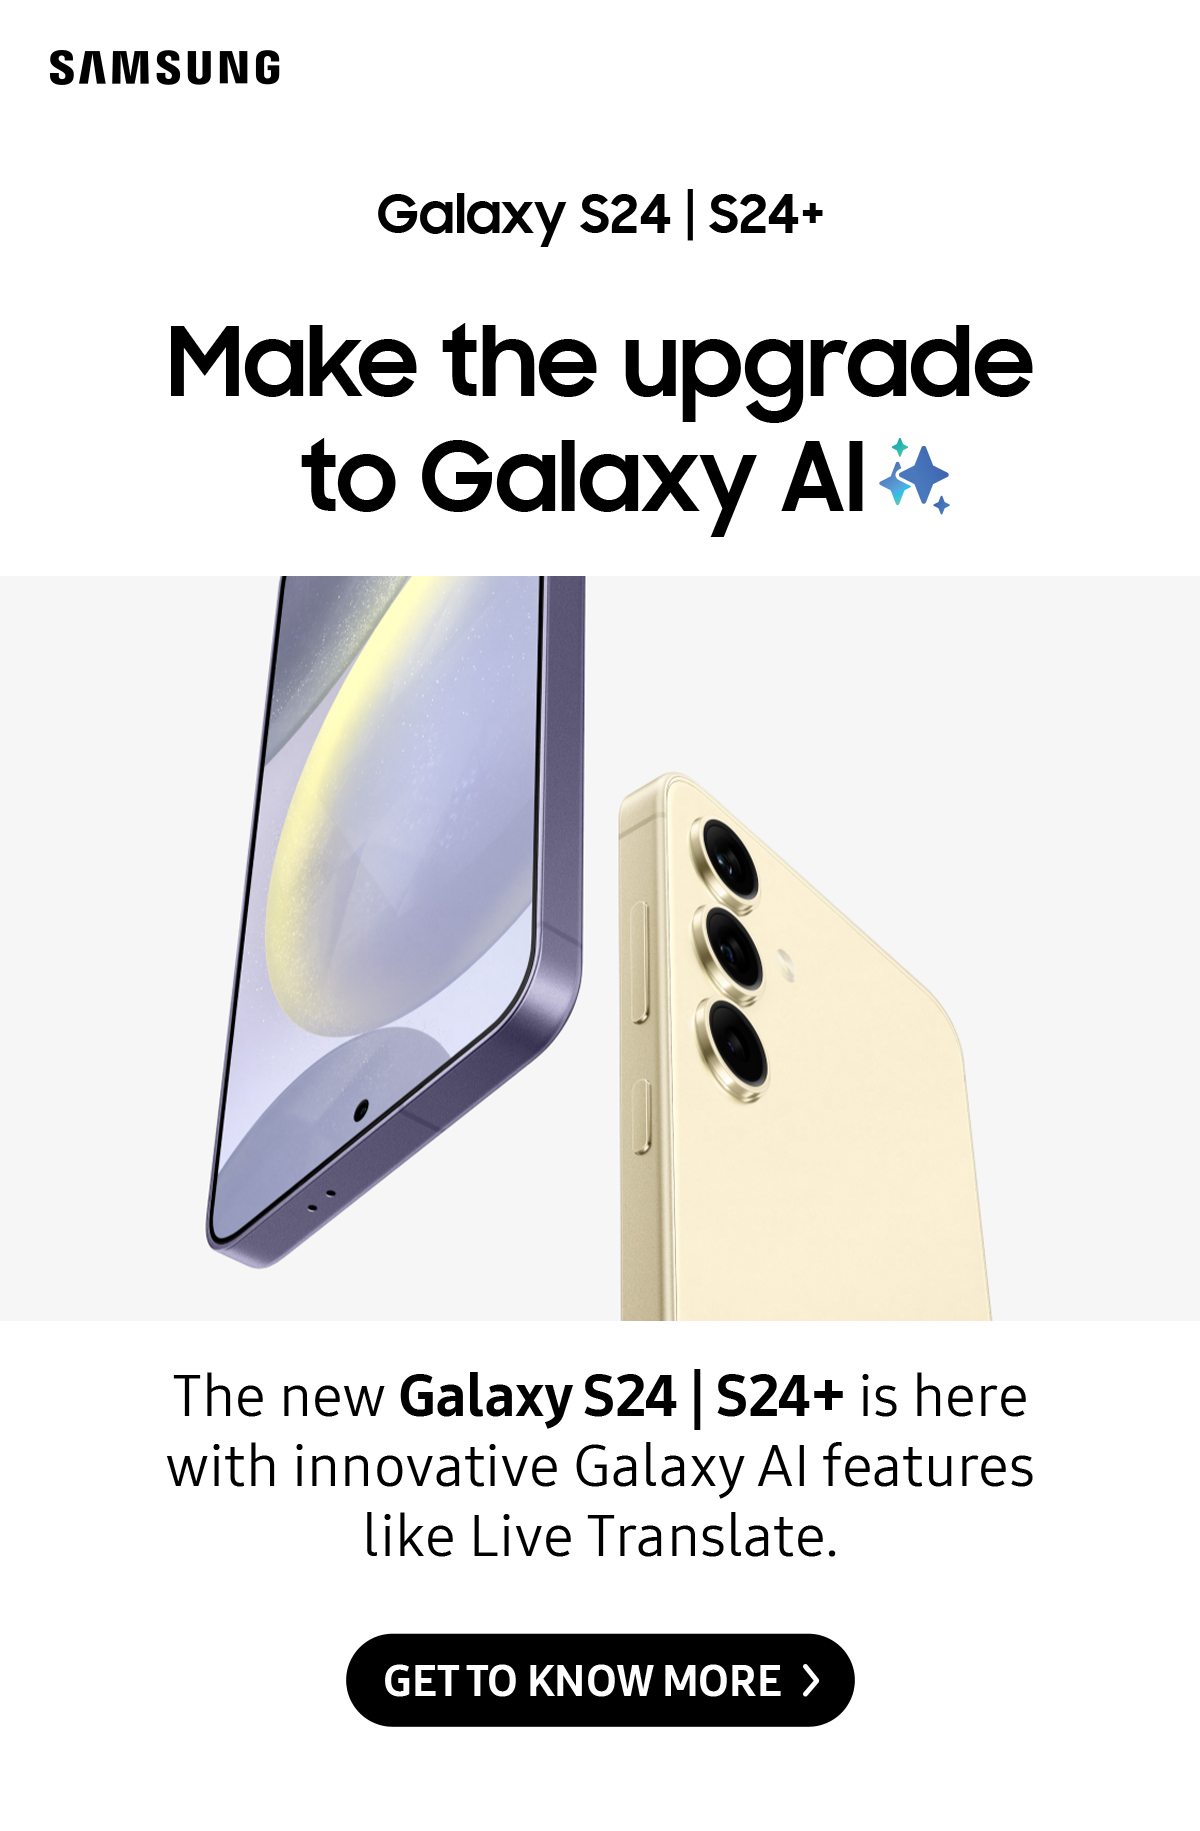 Make the upgrade to Galaxy AI | The new Galaxy S24 | S24+ is here with innovative Galaxy Al features like Live Translate.